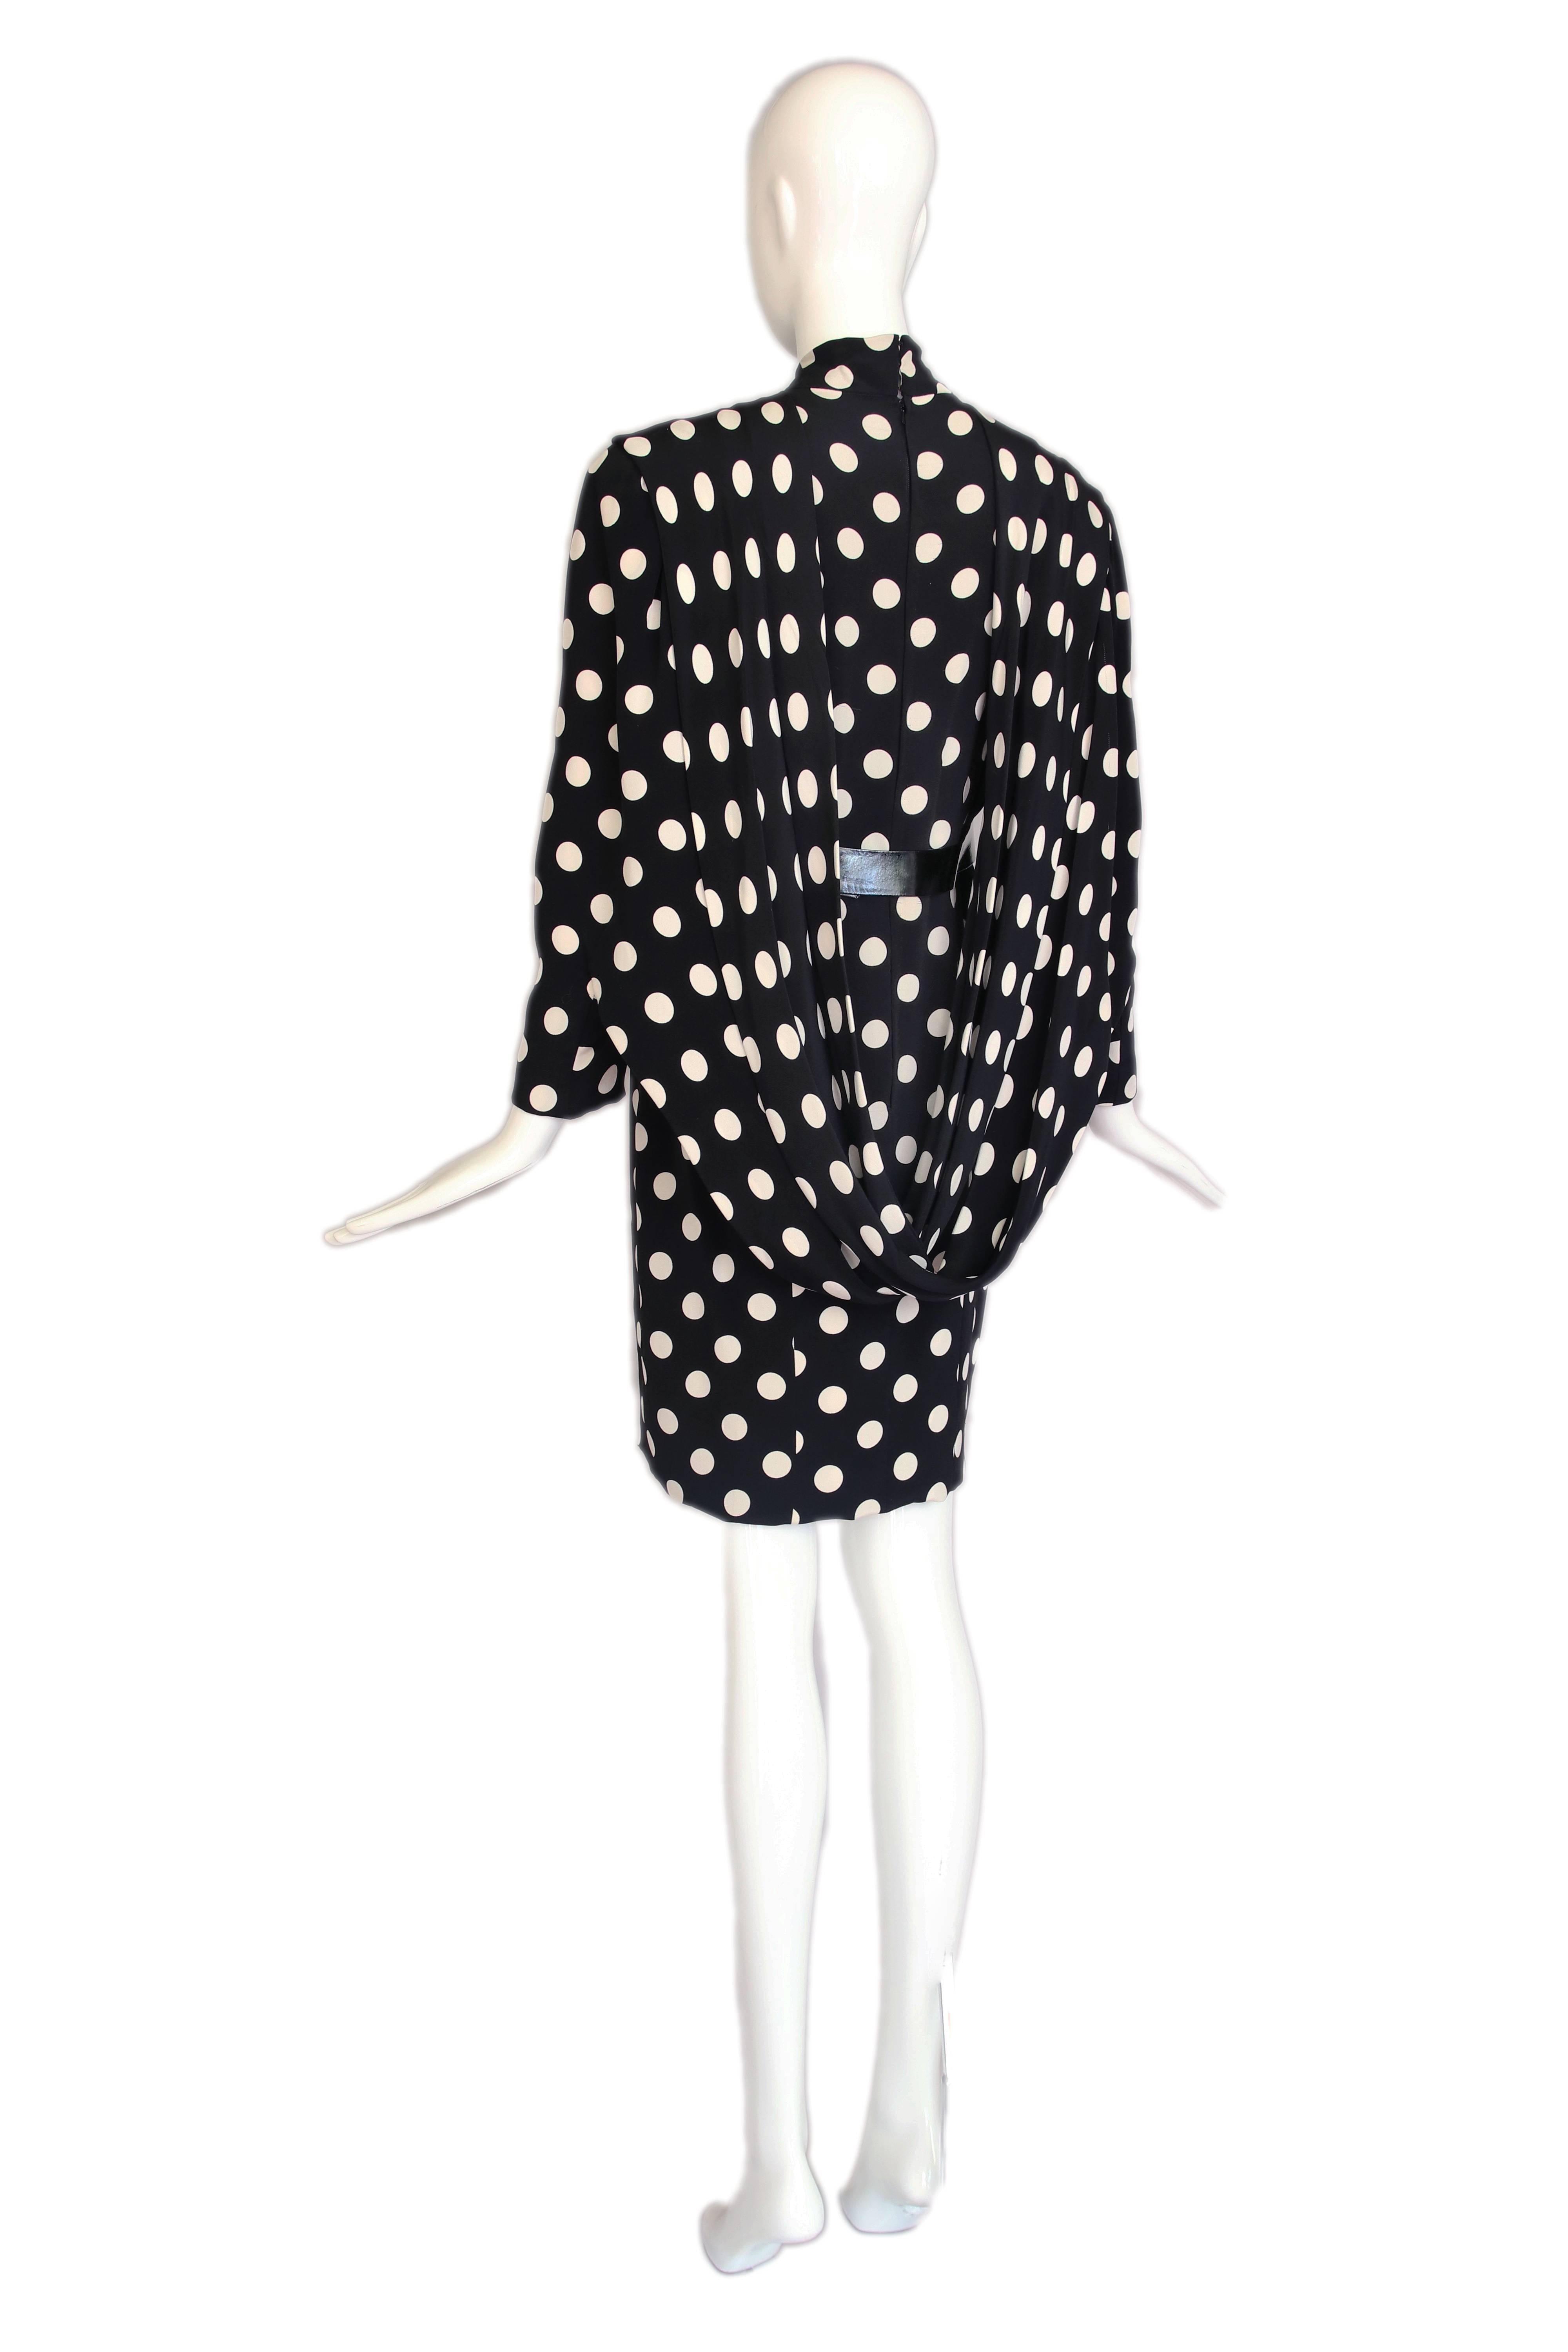 1987 Pierre Balmain haute couture black and white silk polka dot cocktail dress with patent leather belt and fabric drape at back shoulder that attaches at sleeves for dramatic effect. Attached is original editorial. In excellent